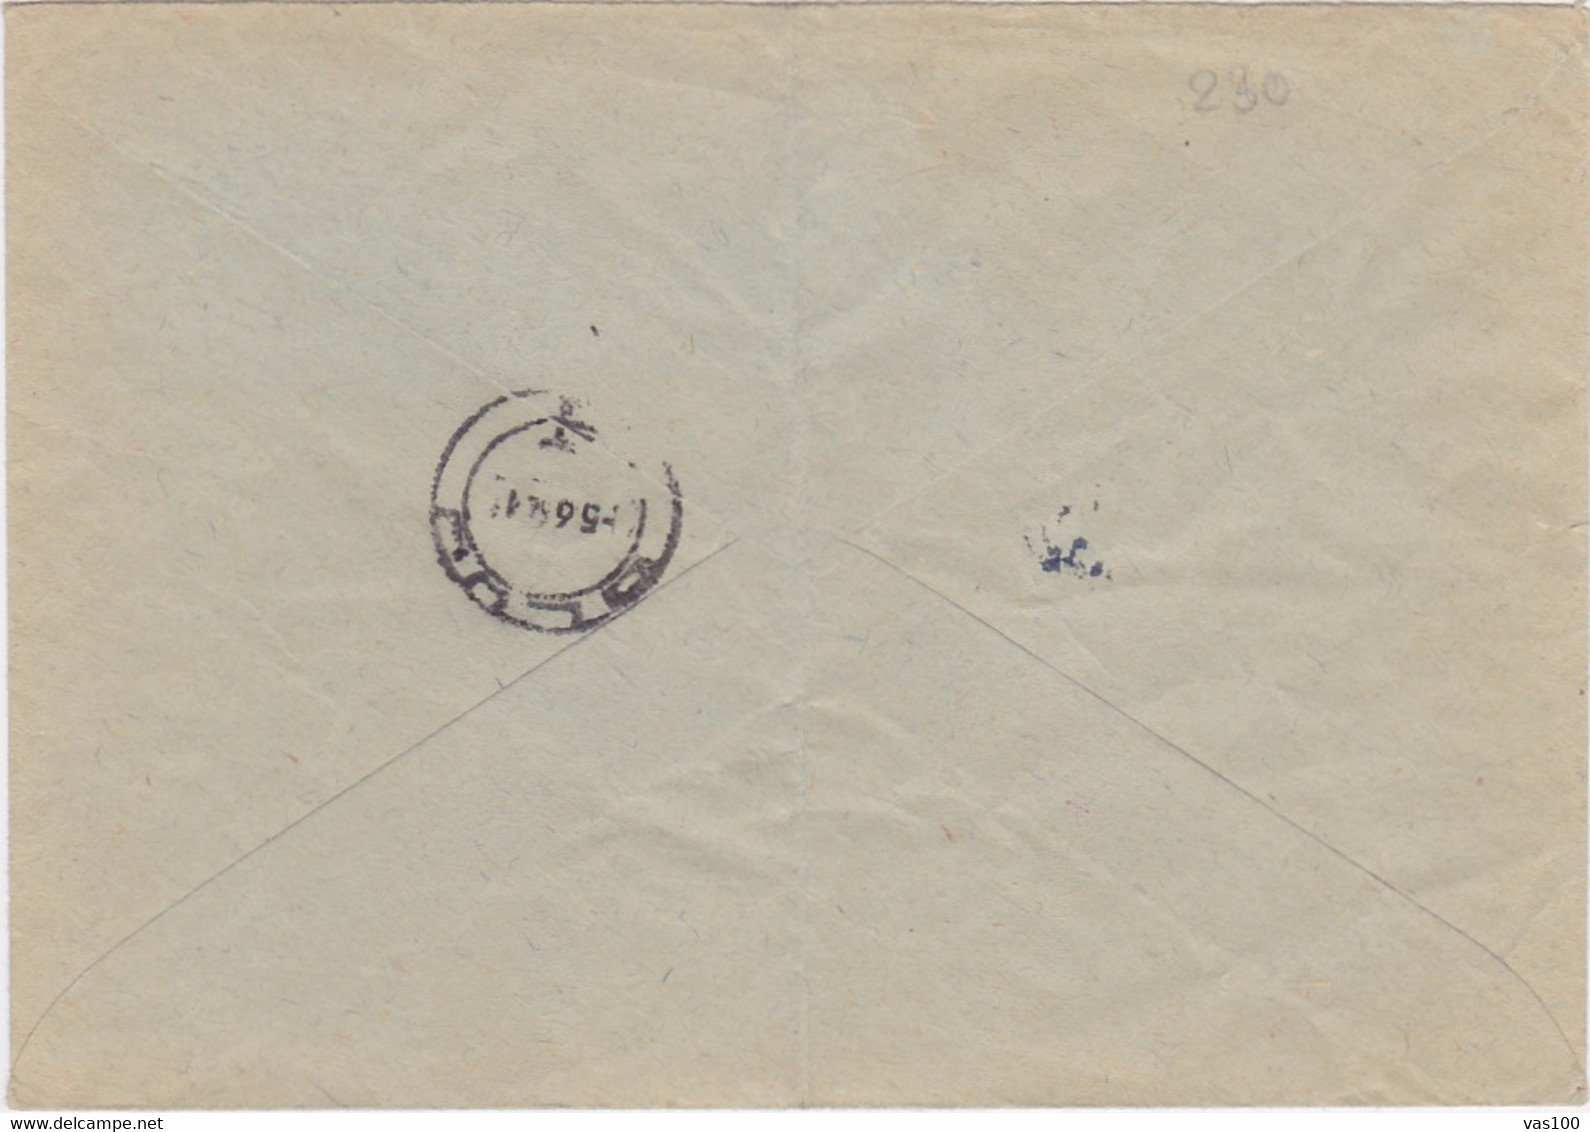 NAVY SOLDIER, INTERNATIONAL DAY OF THE CHILD, STAMPS ON REGISTERED COVER, 1956, ROMANIA - Covers & Documents